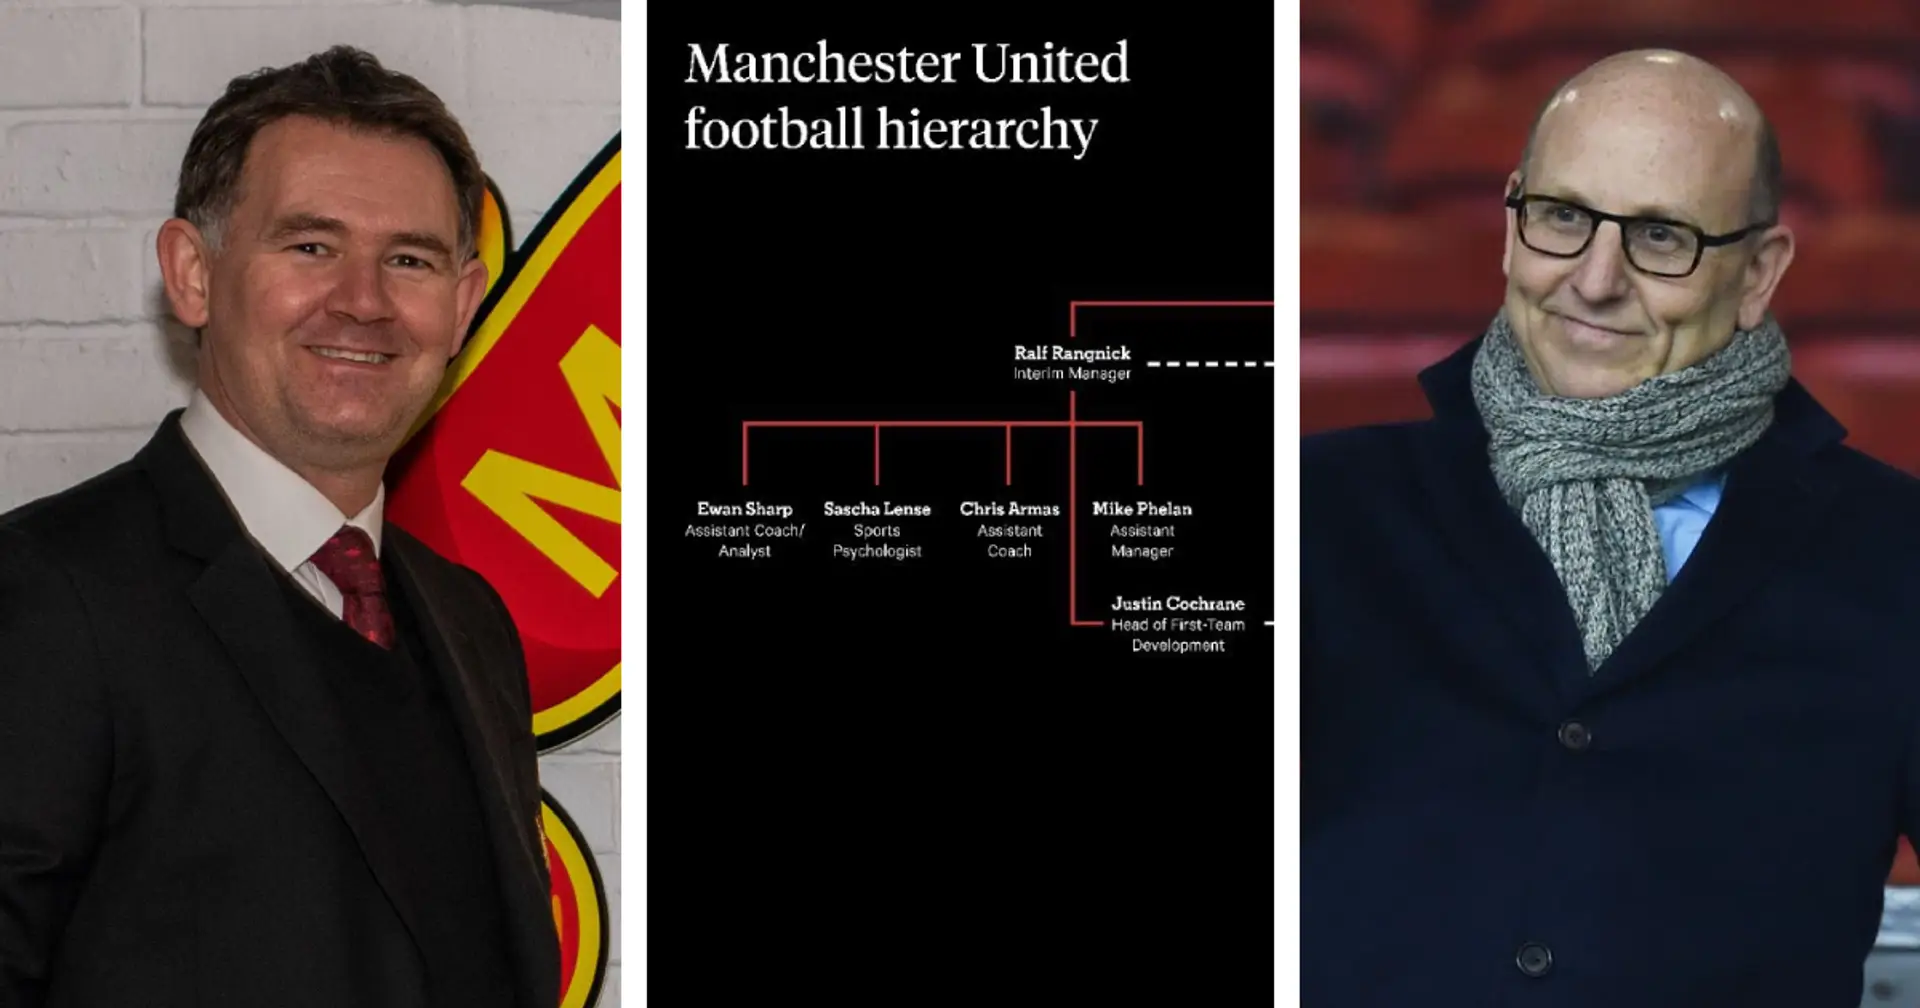 Ralf Rangnick and John Murtough equal, Joel Glazer above all: Man United's football hierarchy explained